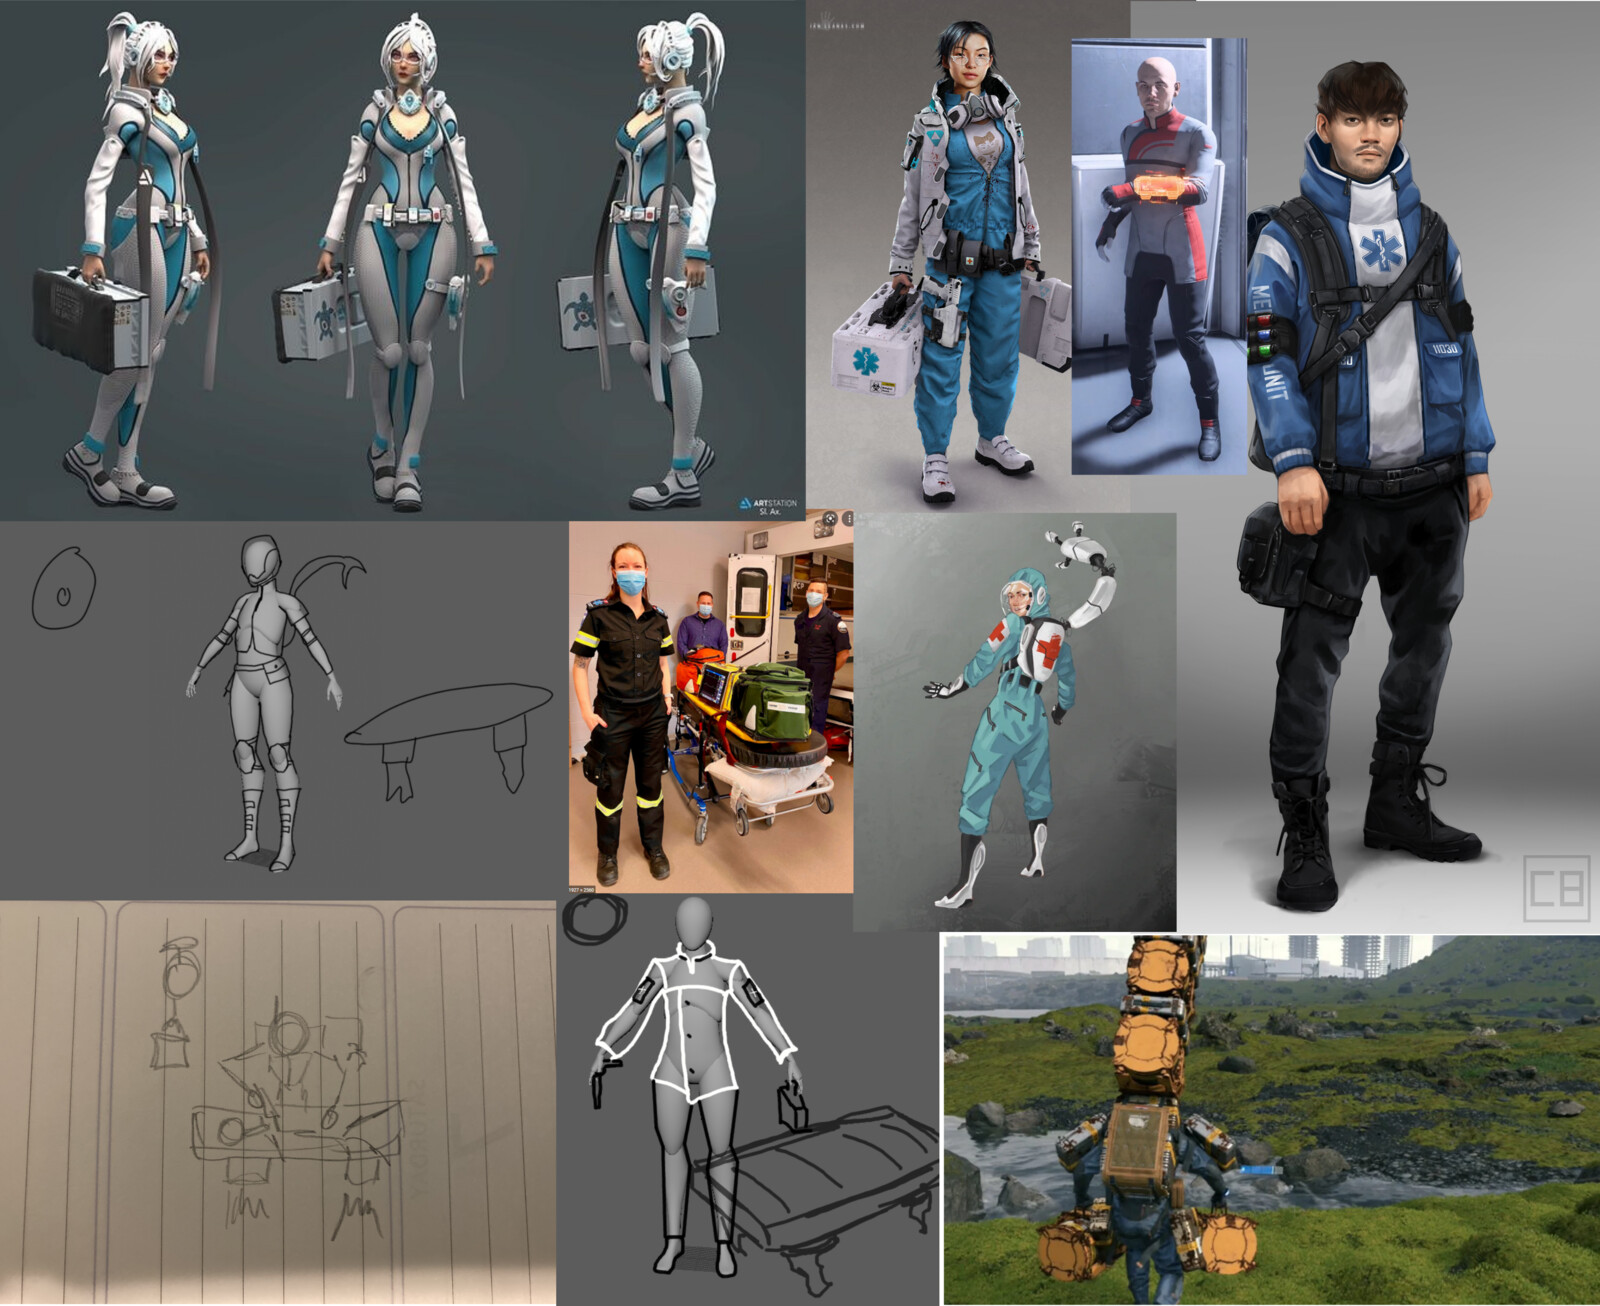 This was my moodboard for the character's clothing. I also added the sketches Gabrielle (the drawing on top with knee pads) and I did (the two at the bottom left). In the end, we mixed the drawings to create the character and the pose.